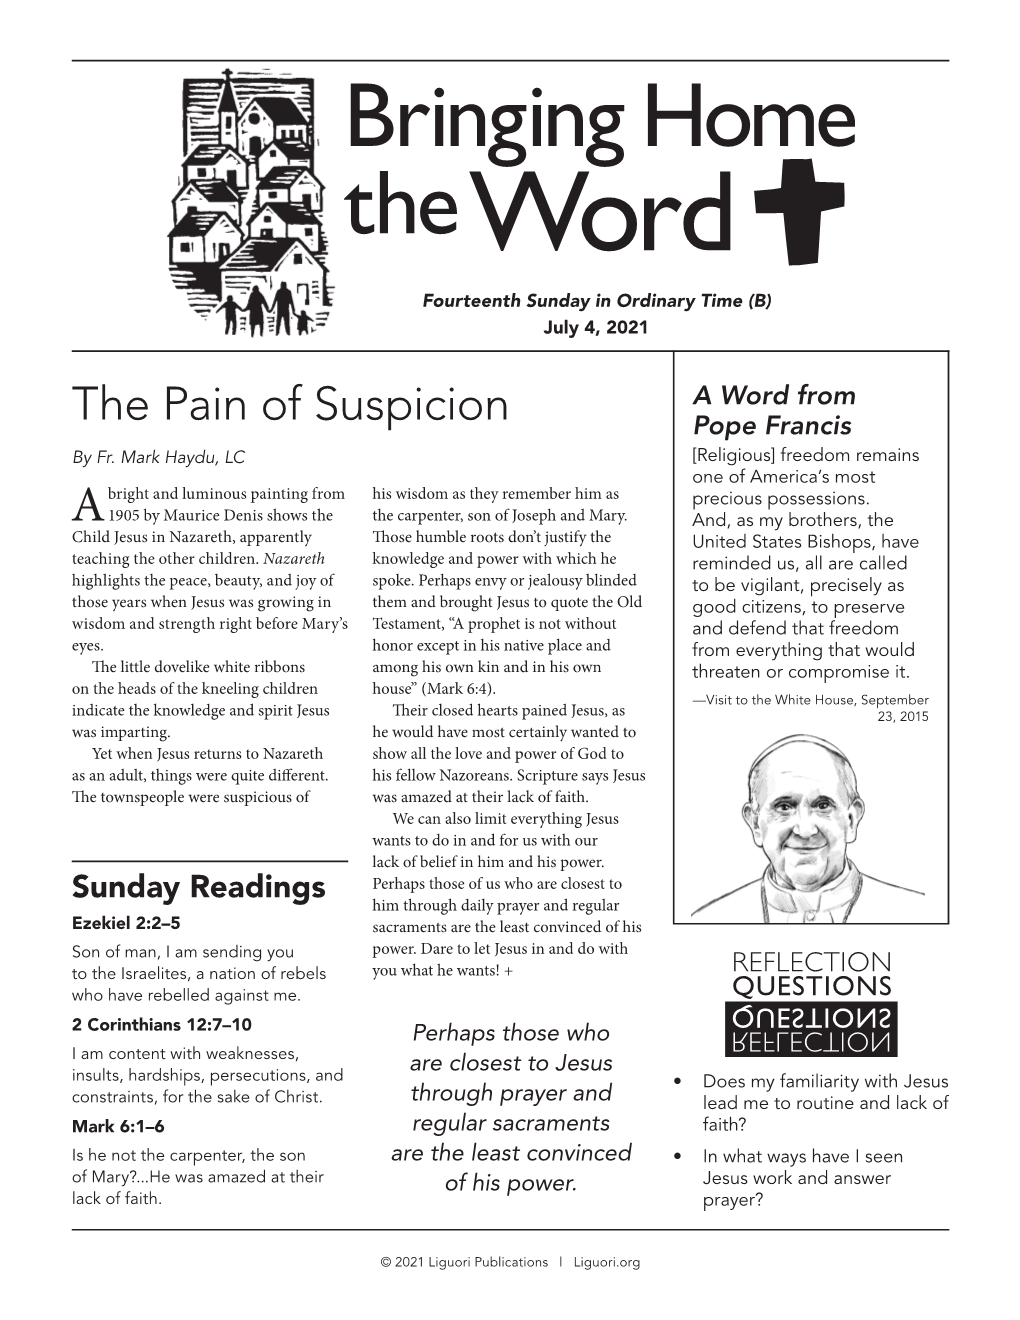 The Pain of Suspicion Pope Francis by Fr